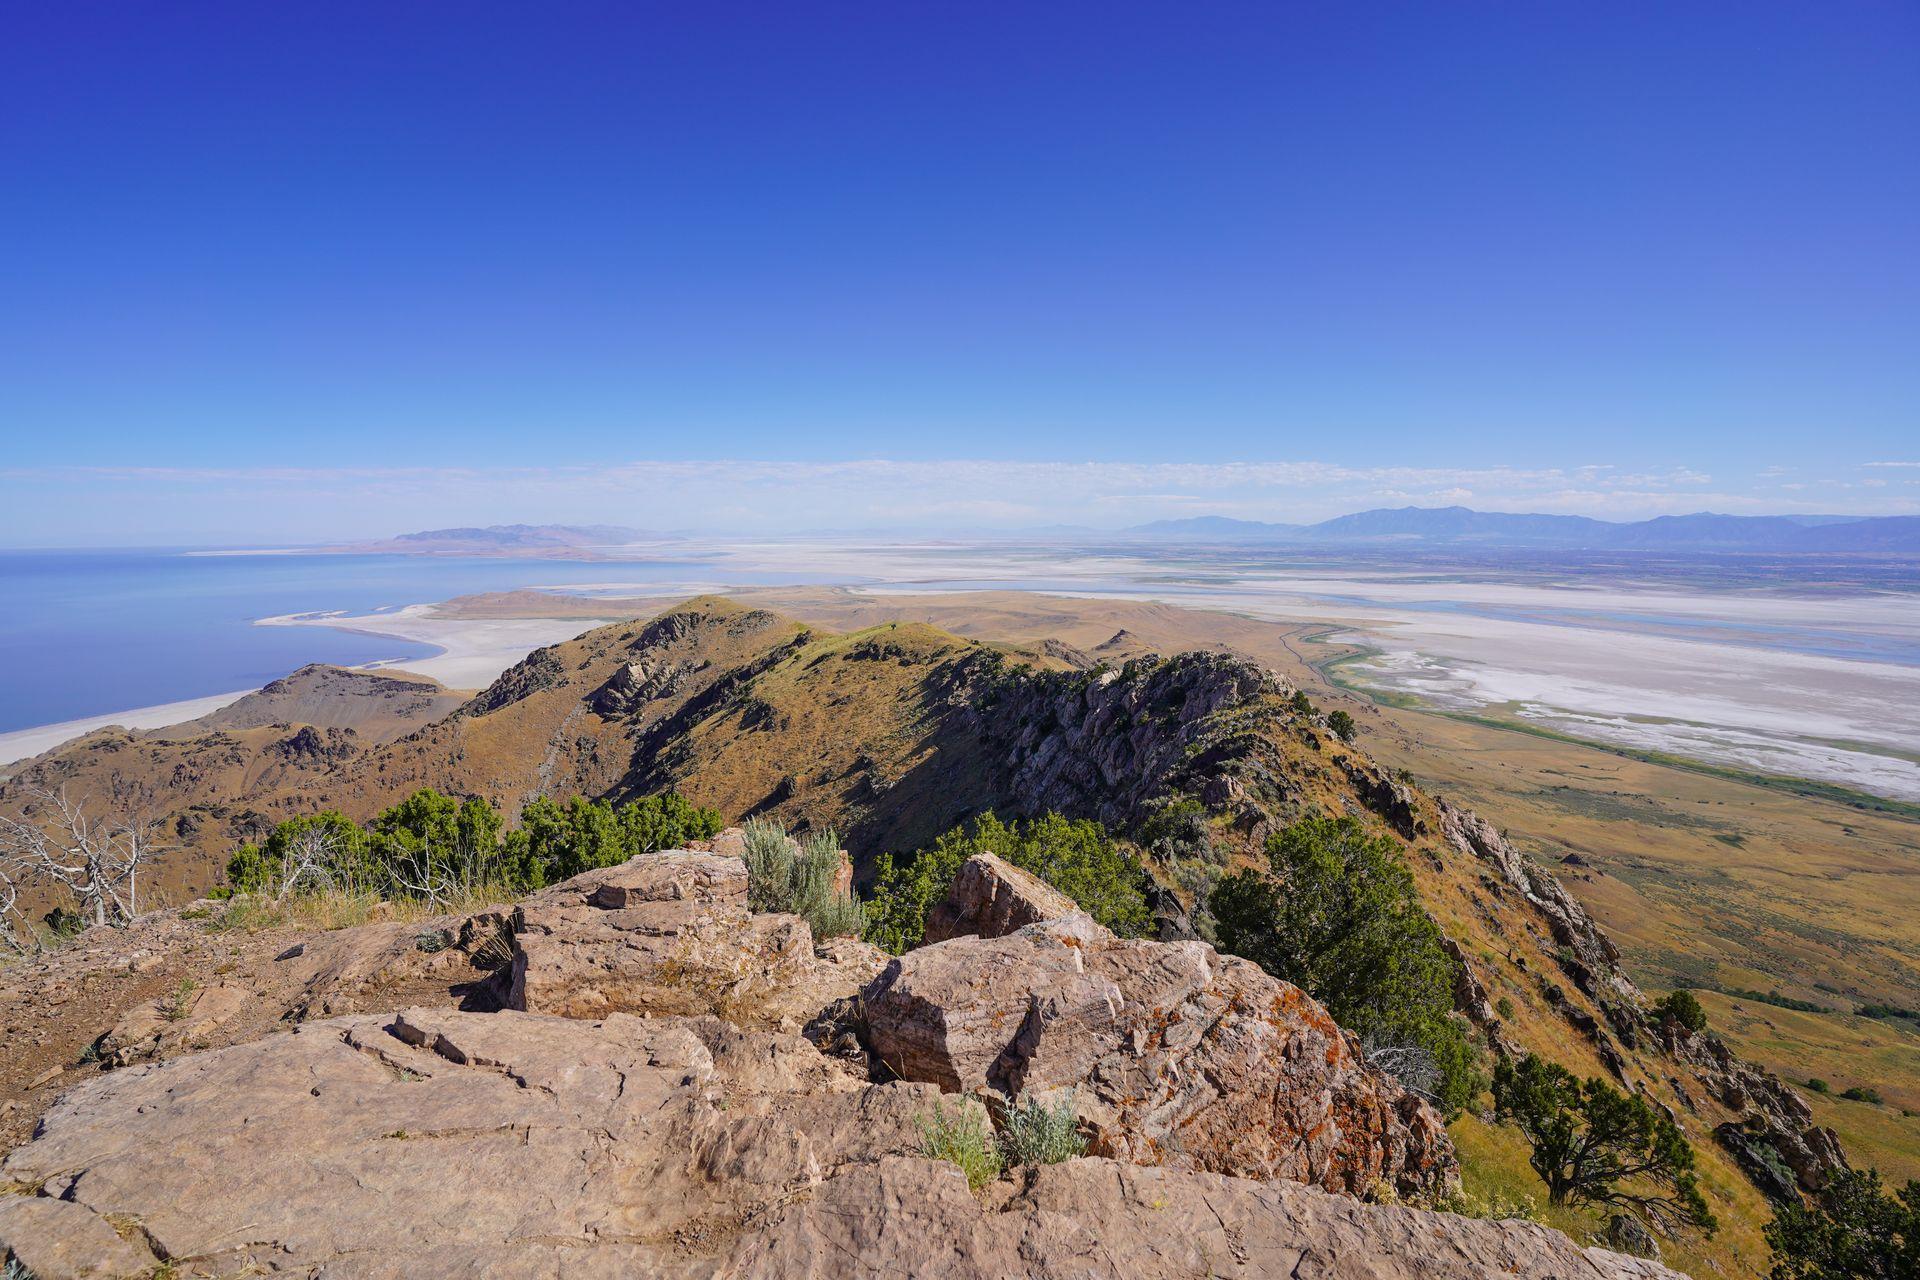 A view of Angelope Island from up high on a trail. There are areas of white sand and the Great Salt Lake surrounding the island.